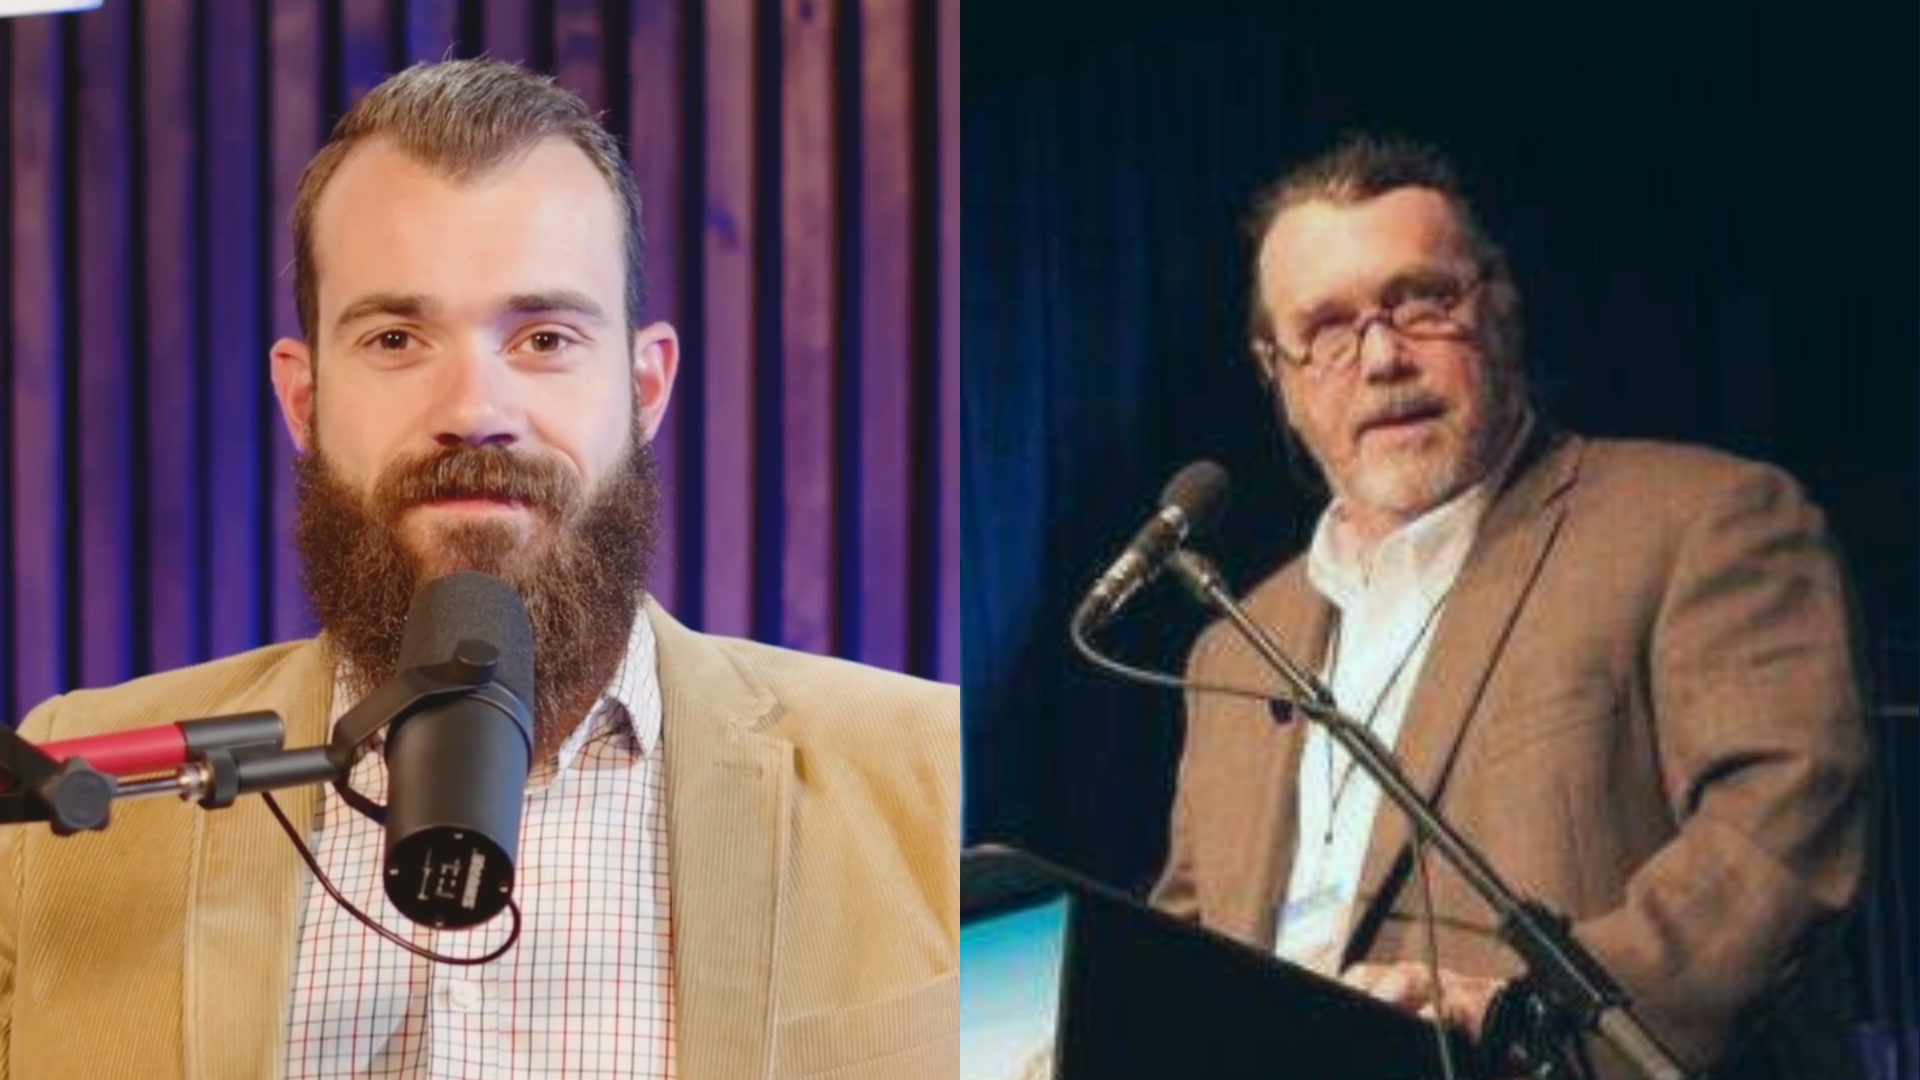 MEGA Episode: A Debate on Prioritism and Holism With Ray Norman and Alex Kocman